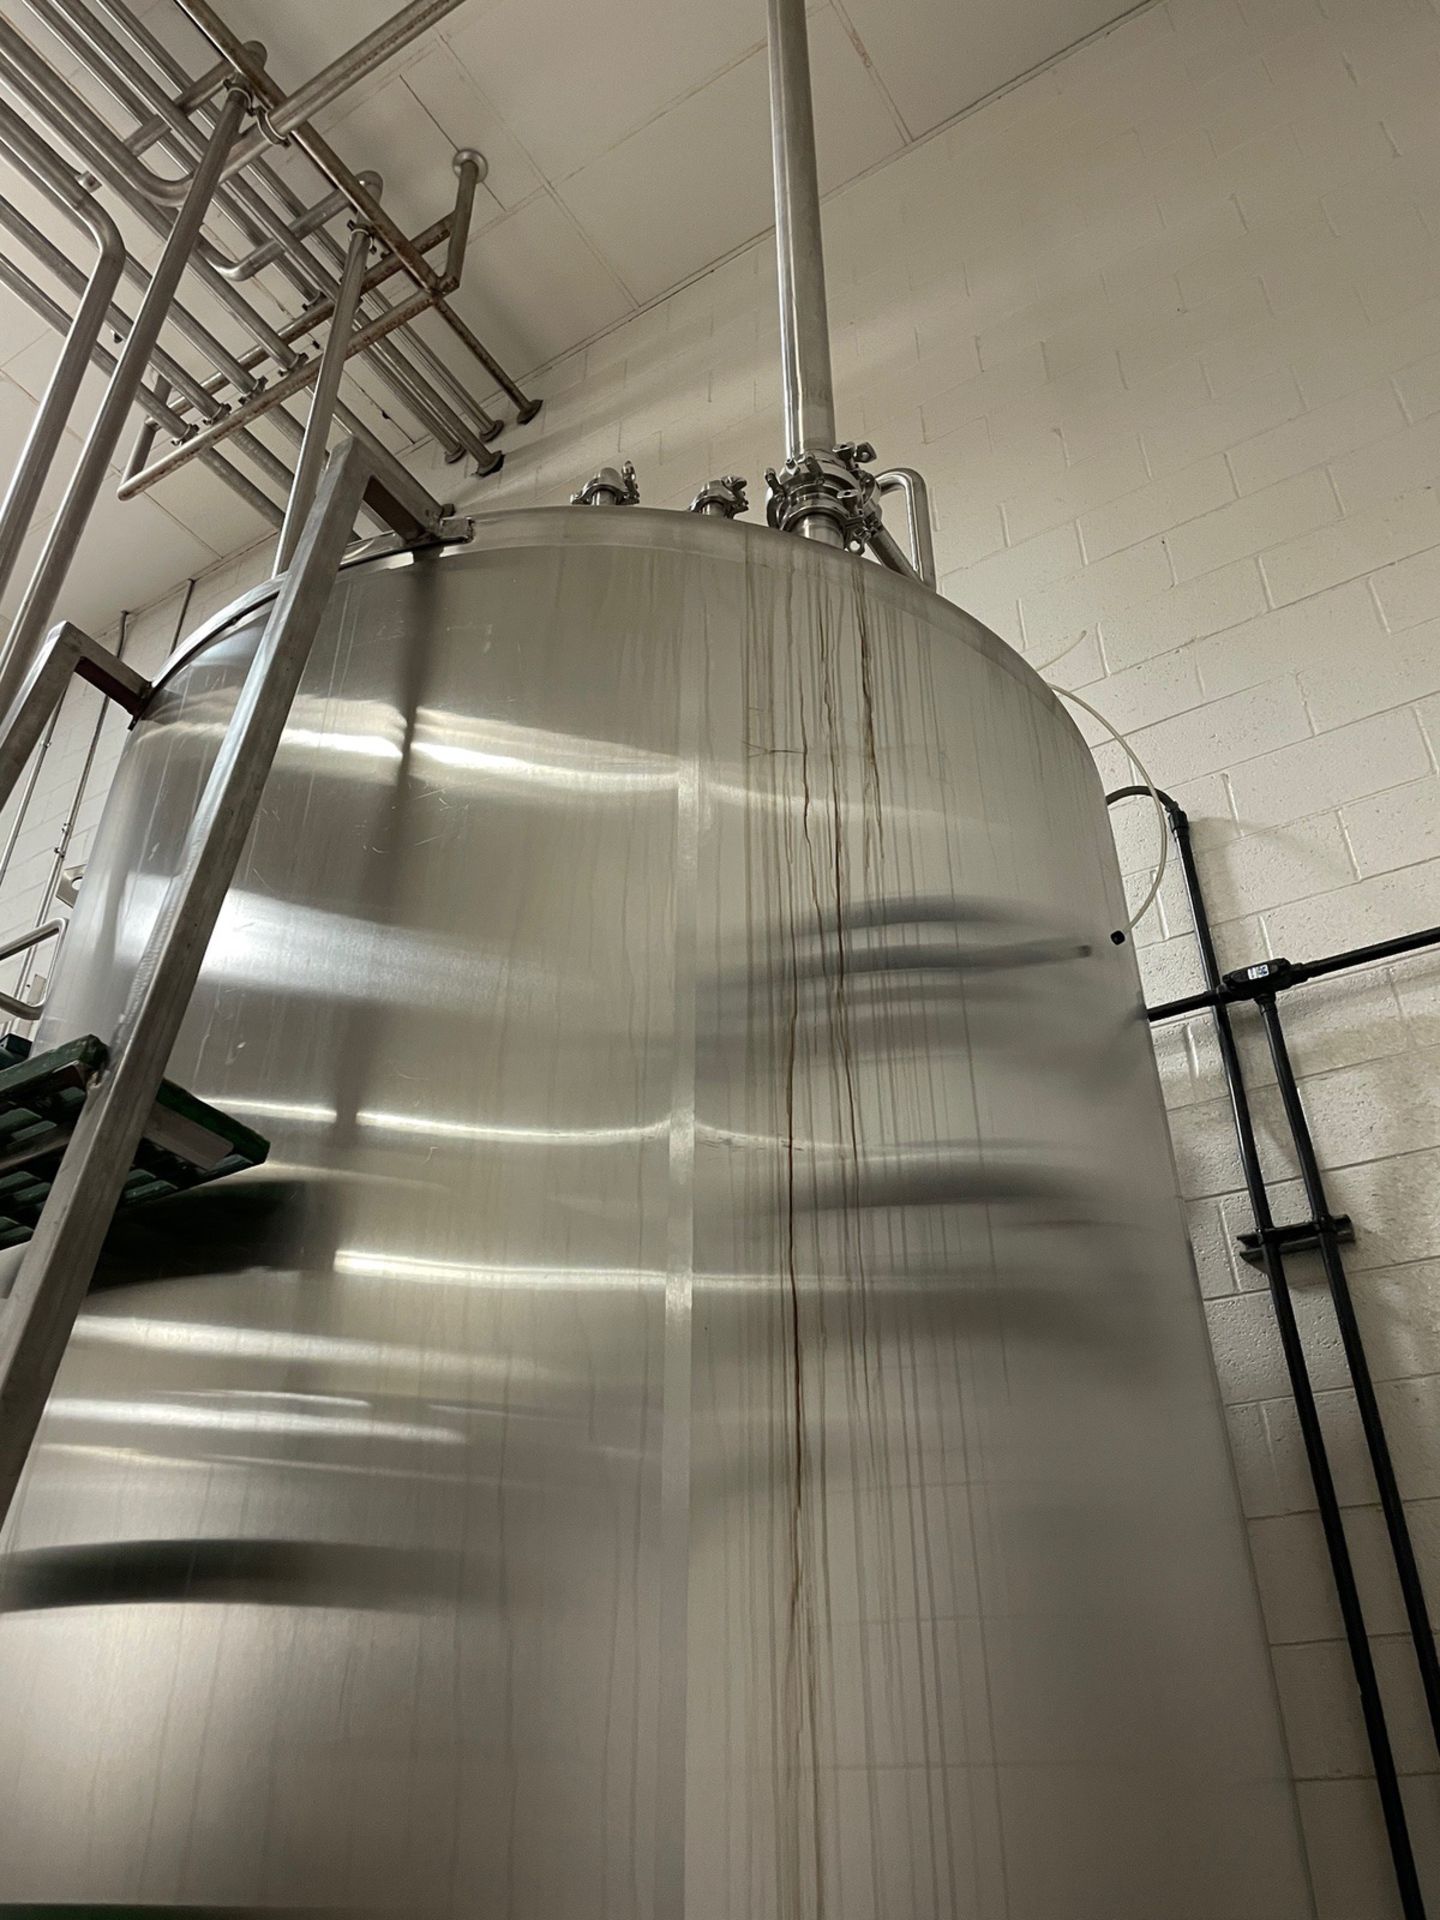 Cherry Burrell 1500 Gallon Stainless Steel Tank, Vertical Agitation, Dish Bottom, D | Rig Fee: $1500 - Image 3 of 5